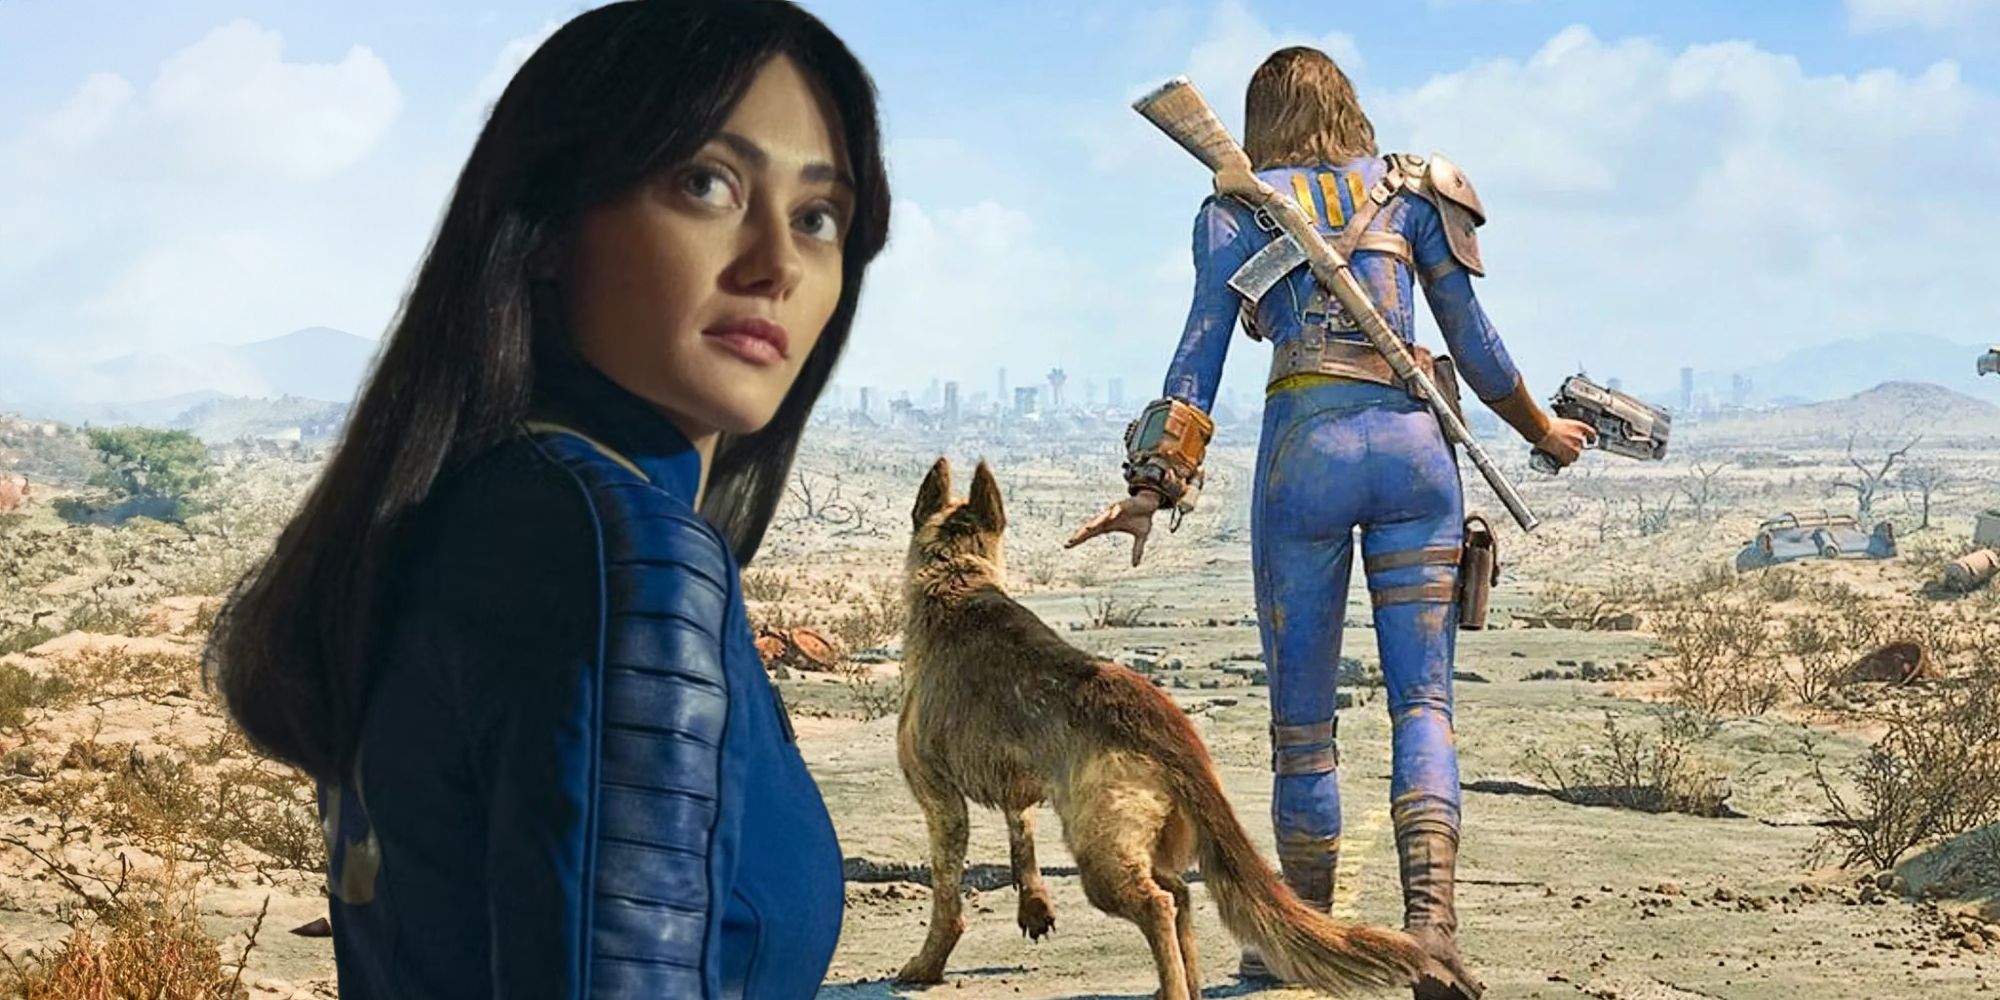 Fallout 4's female survivor and Dogmeat with Lucy McLean from the show